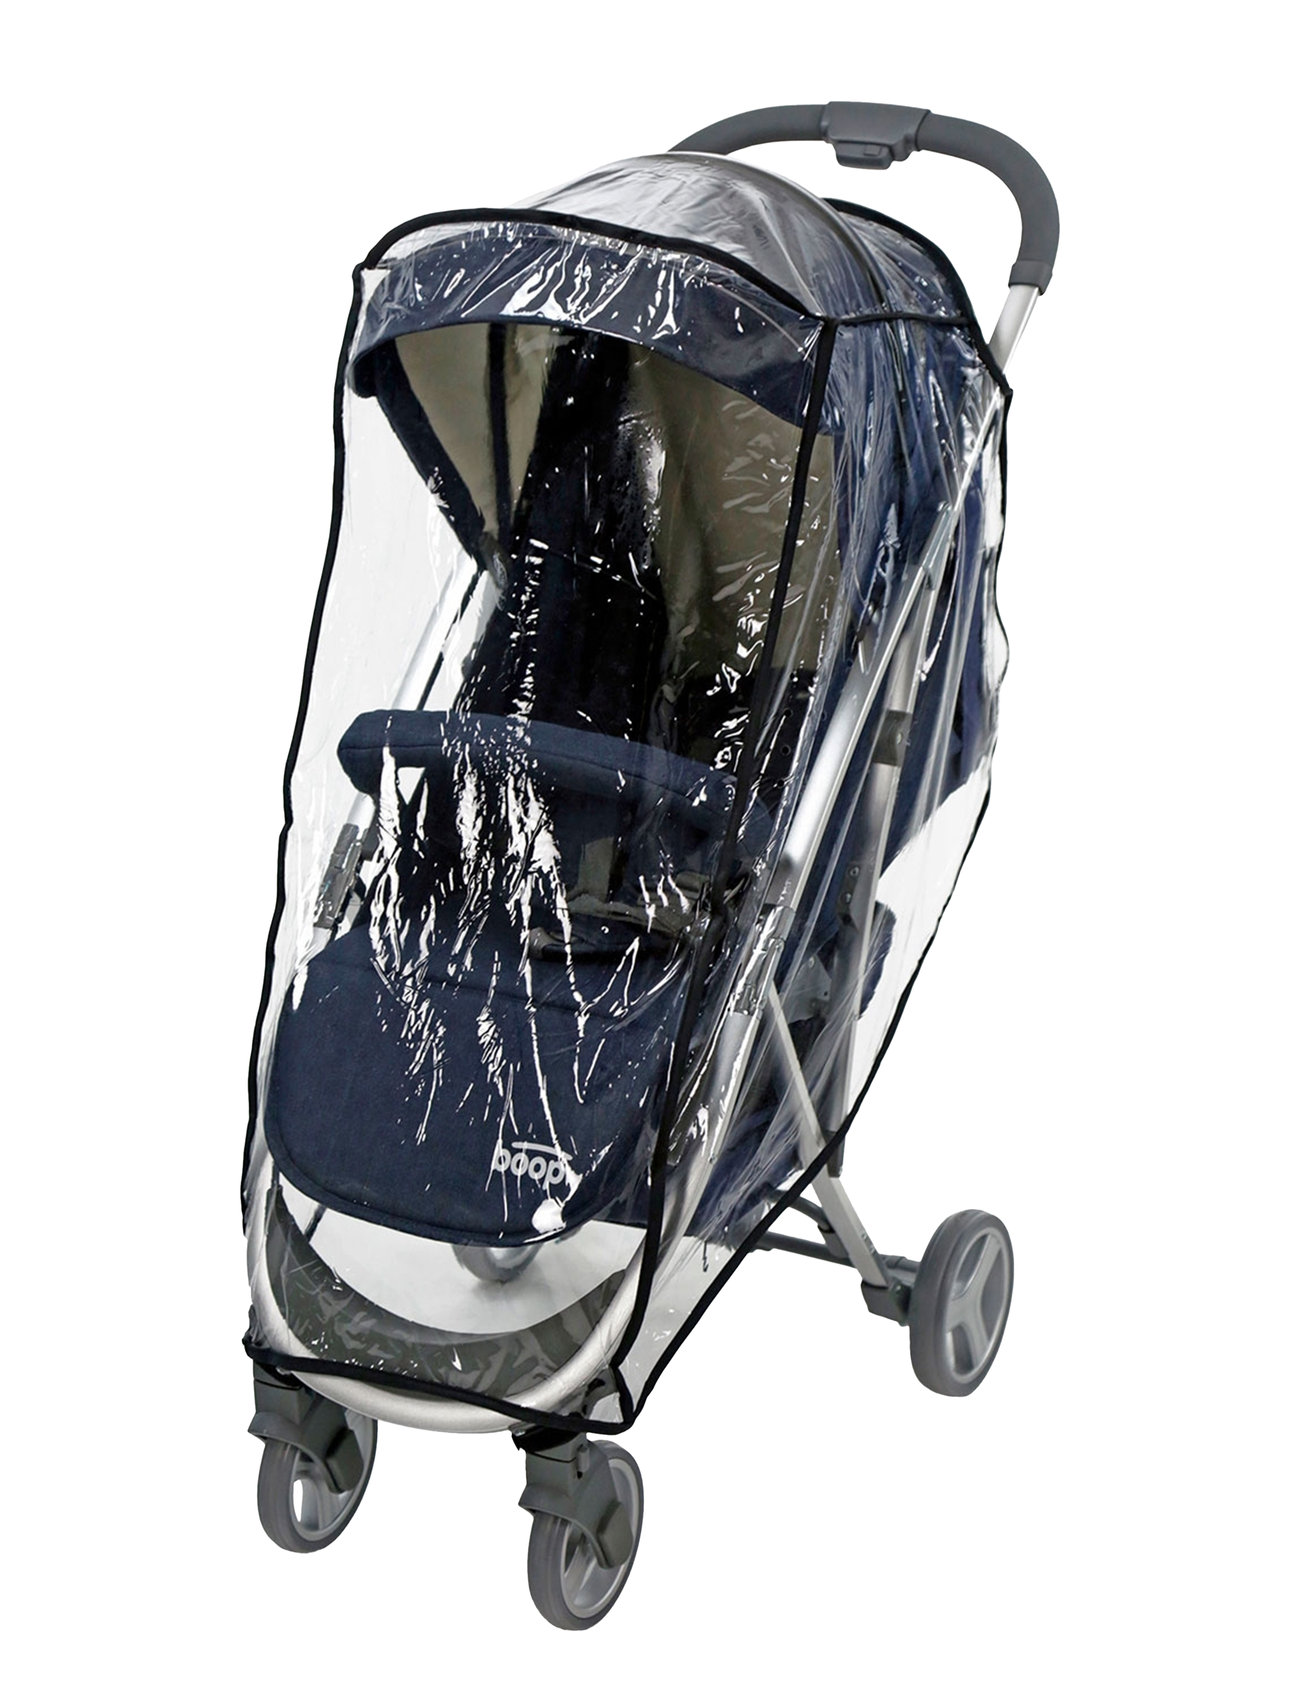 Asalvo Rain Cover For Pushchair, Universal Baby & Maternity Strollers & Accessories Sun- & Raincovers White Asalvo